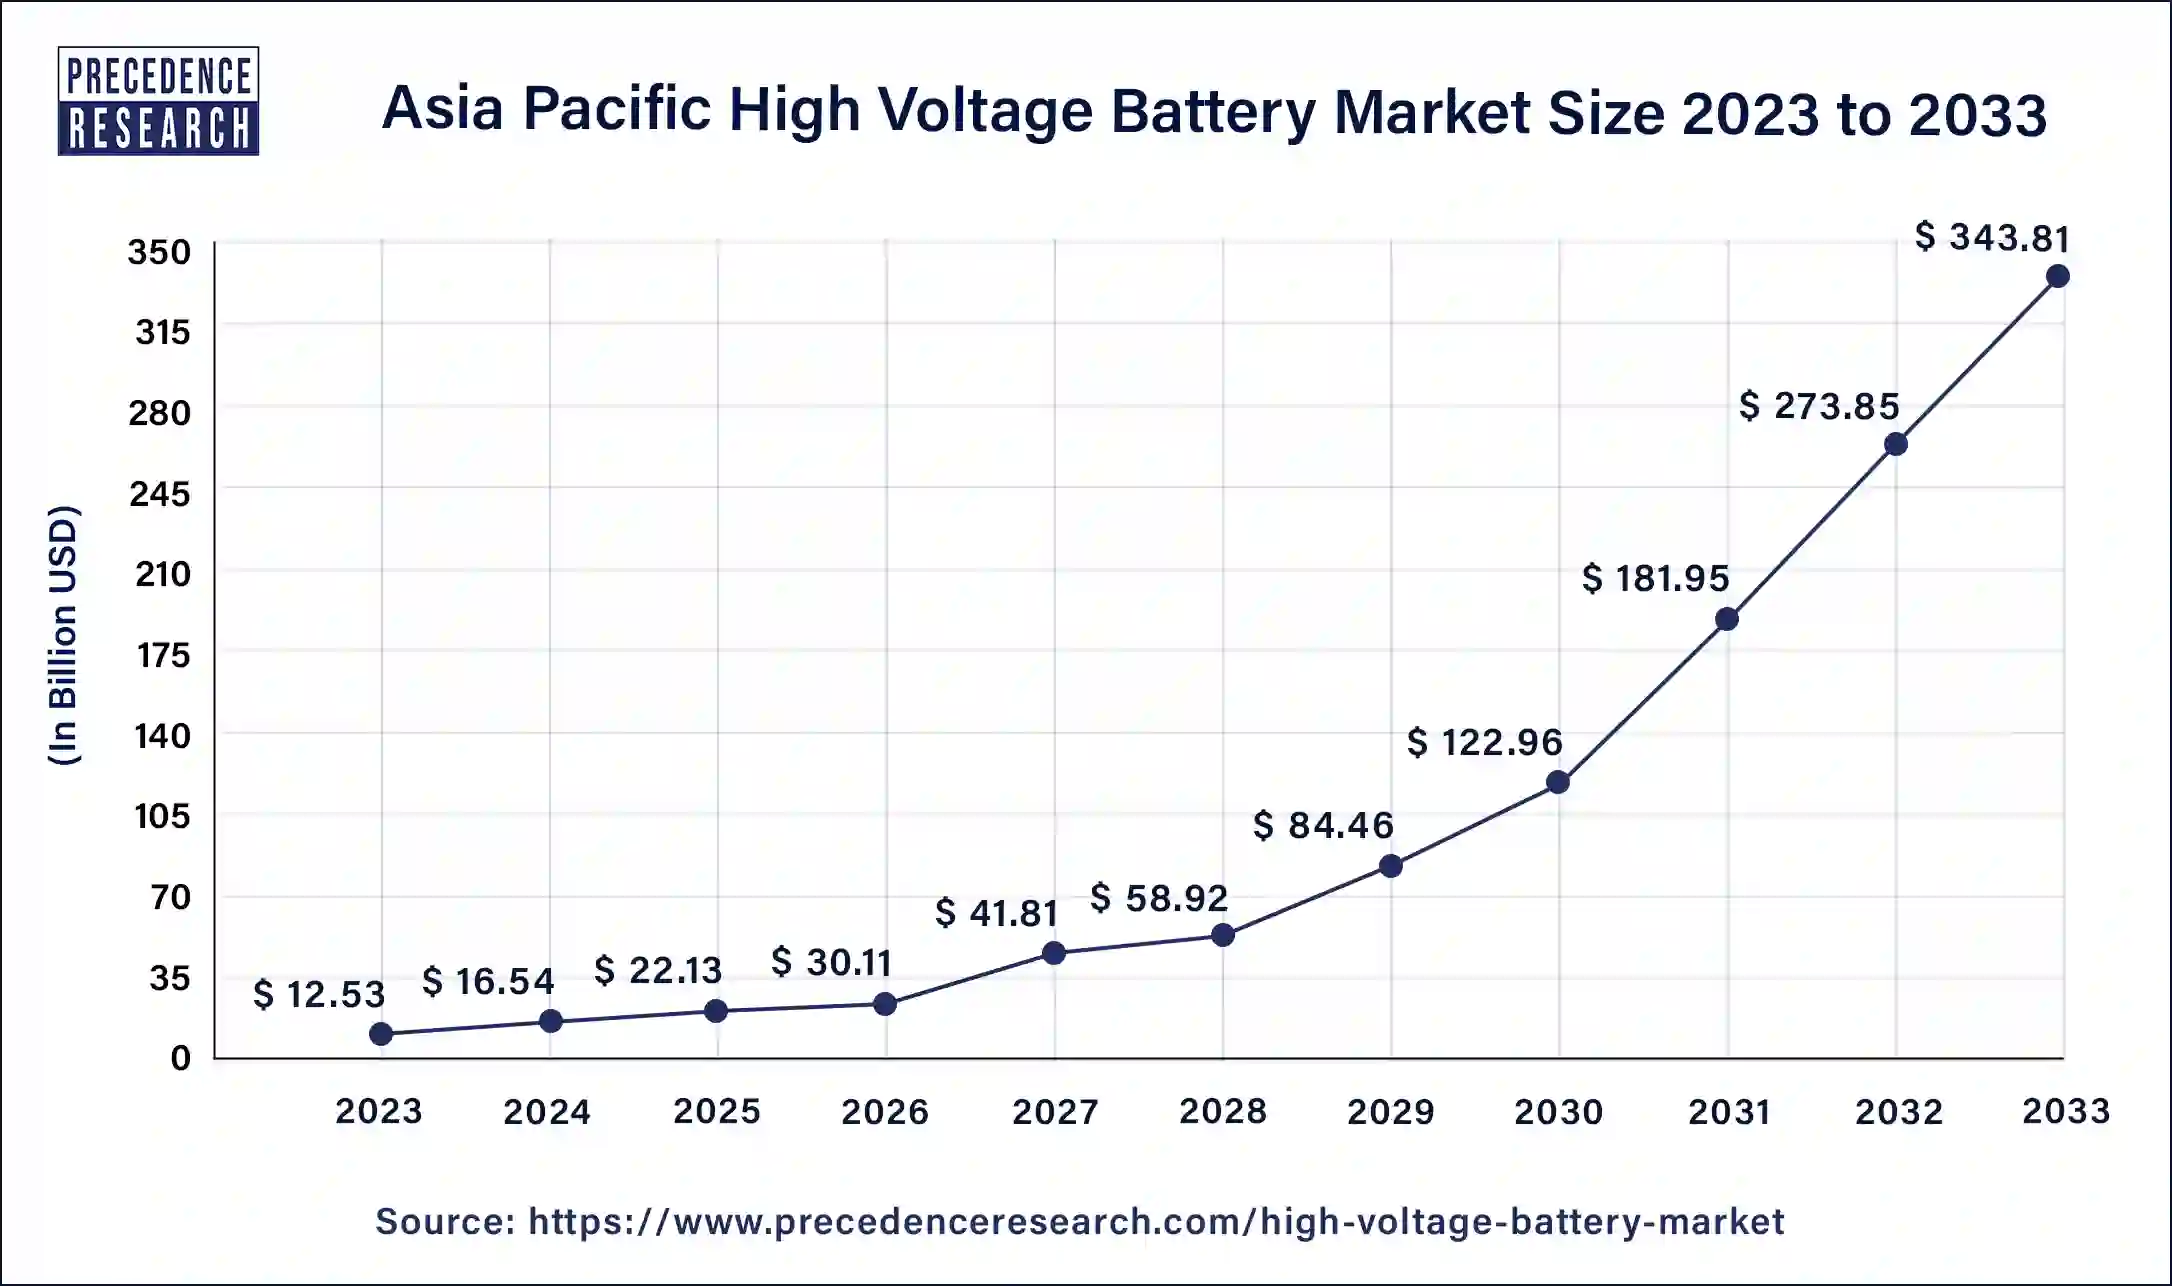 Asia Pacific High Voltage Battery Market Size 2024 To 2033